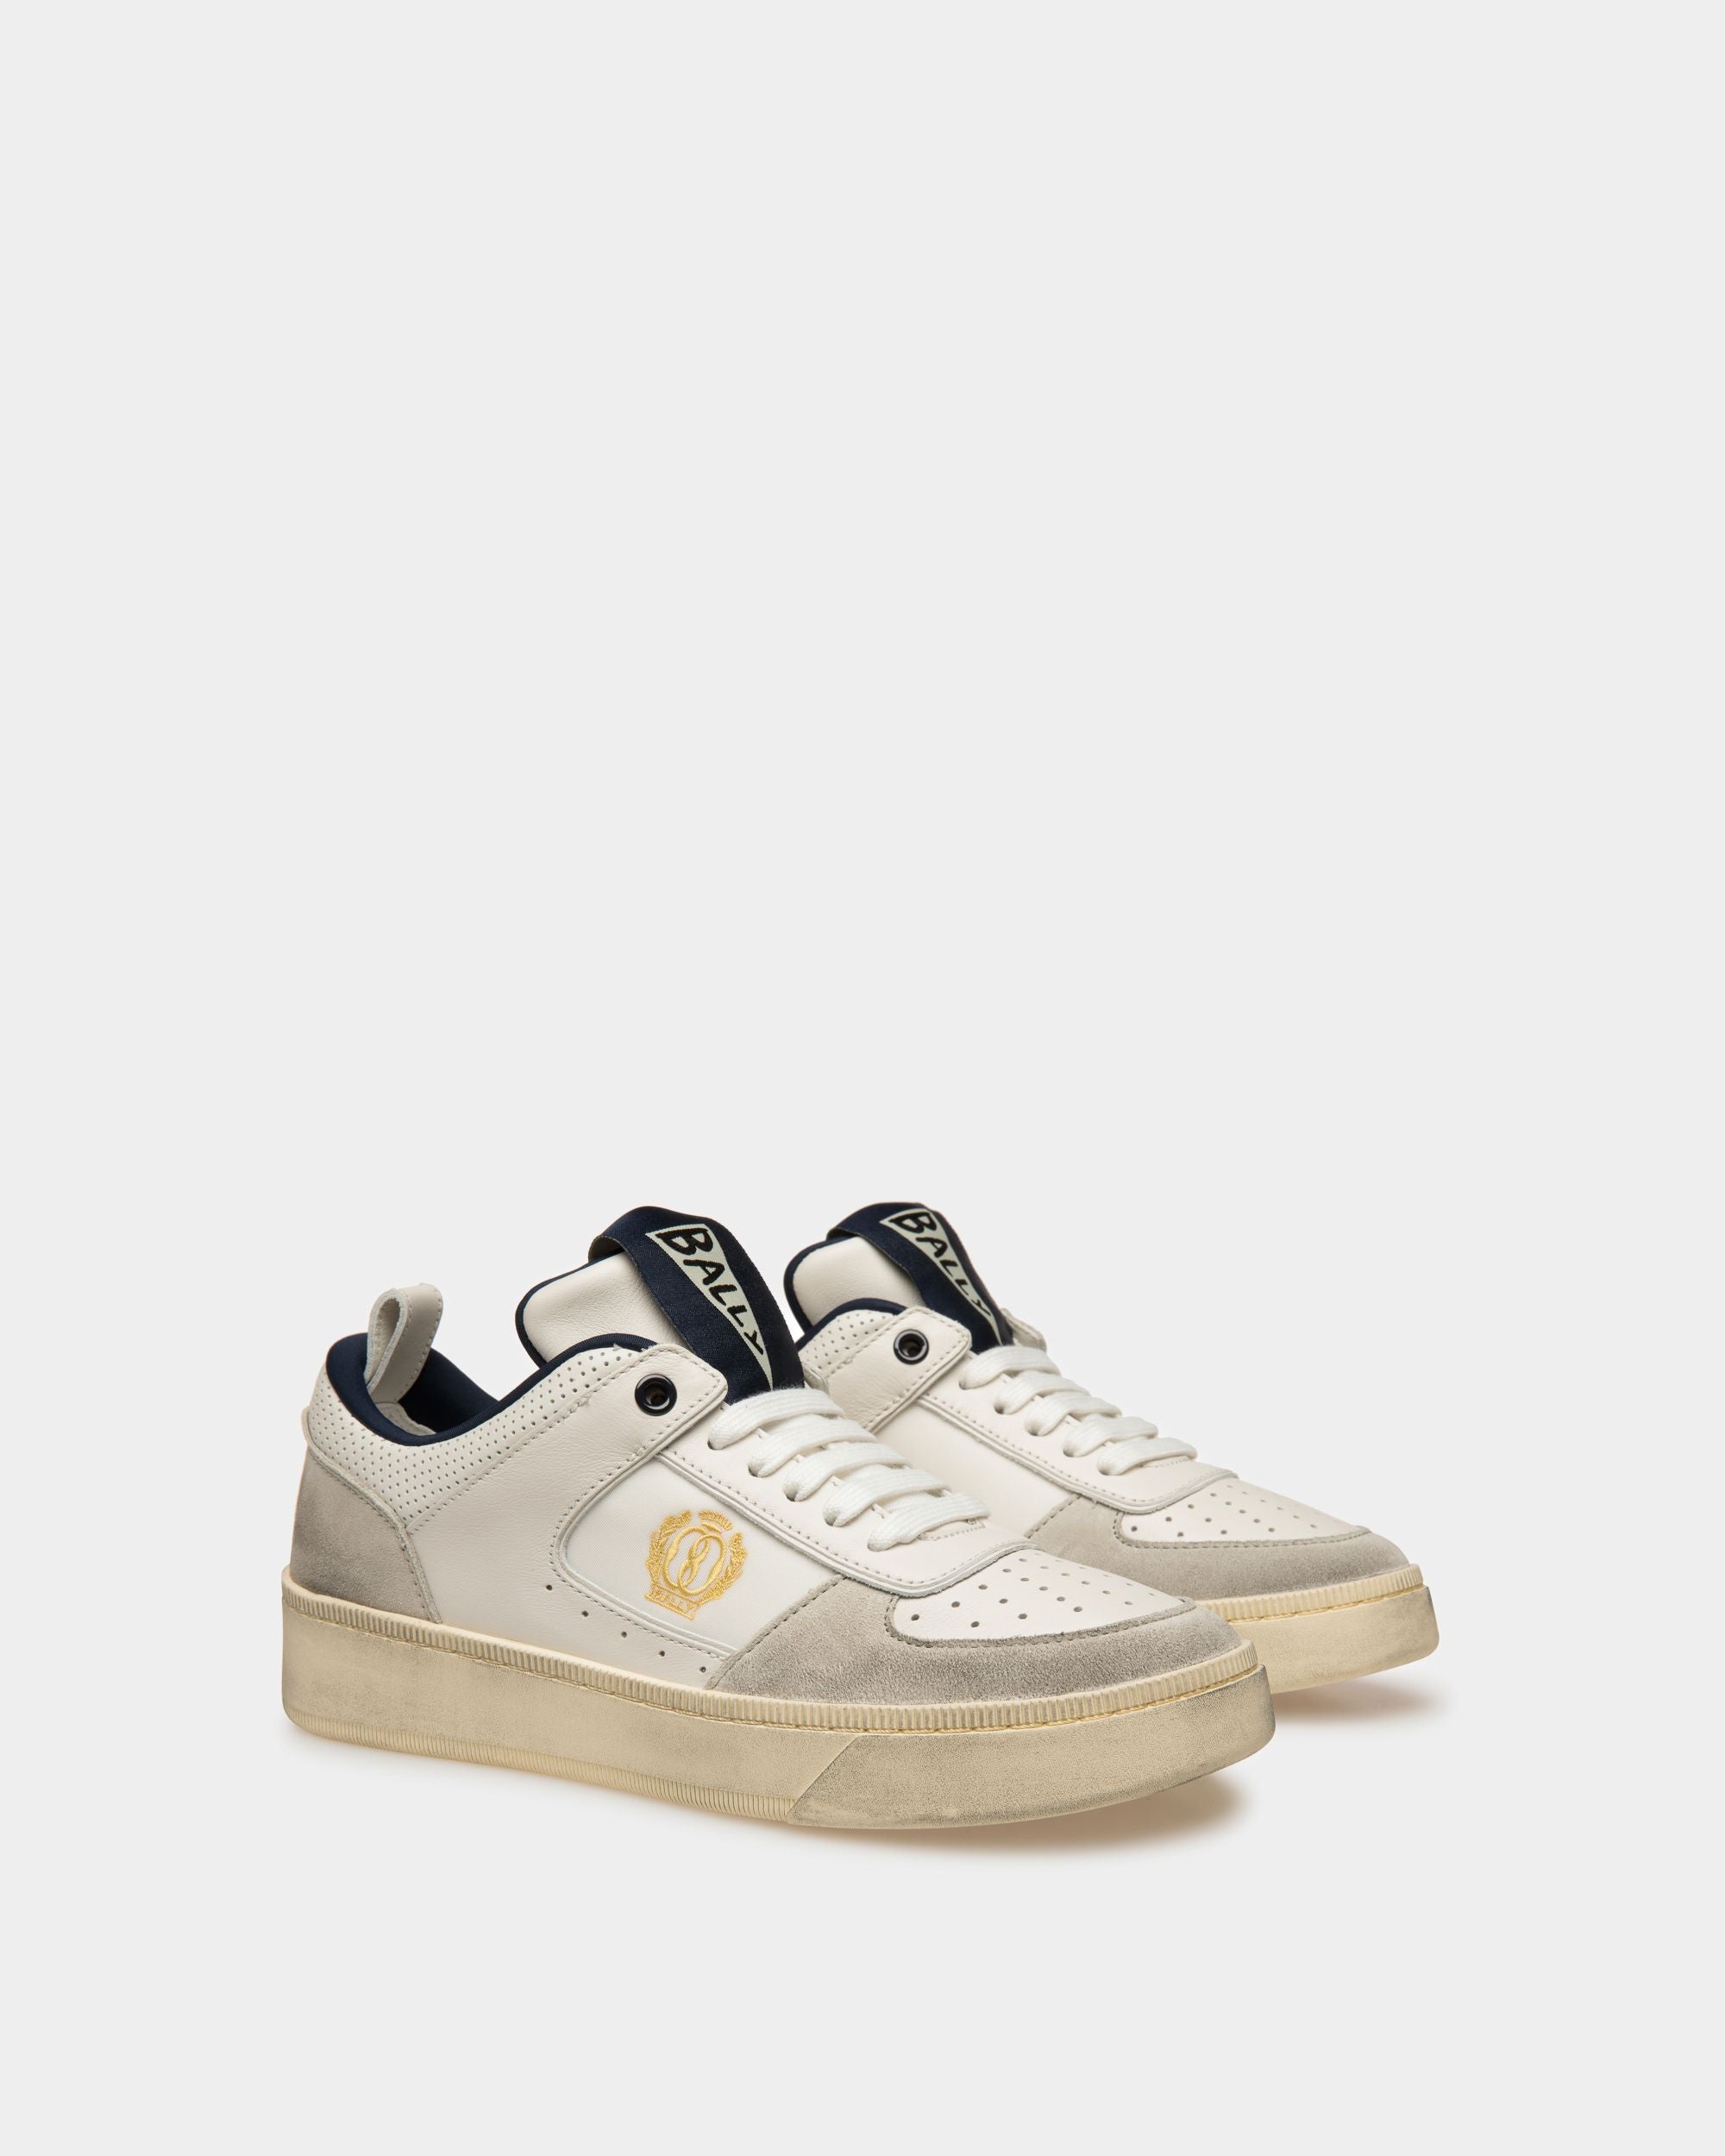 Riweira | Women's Sneakers | Dusty White And Midnight Leather | Bally | Still Life 3/4 Front